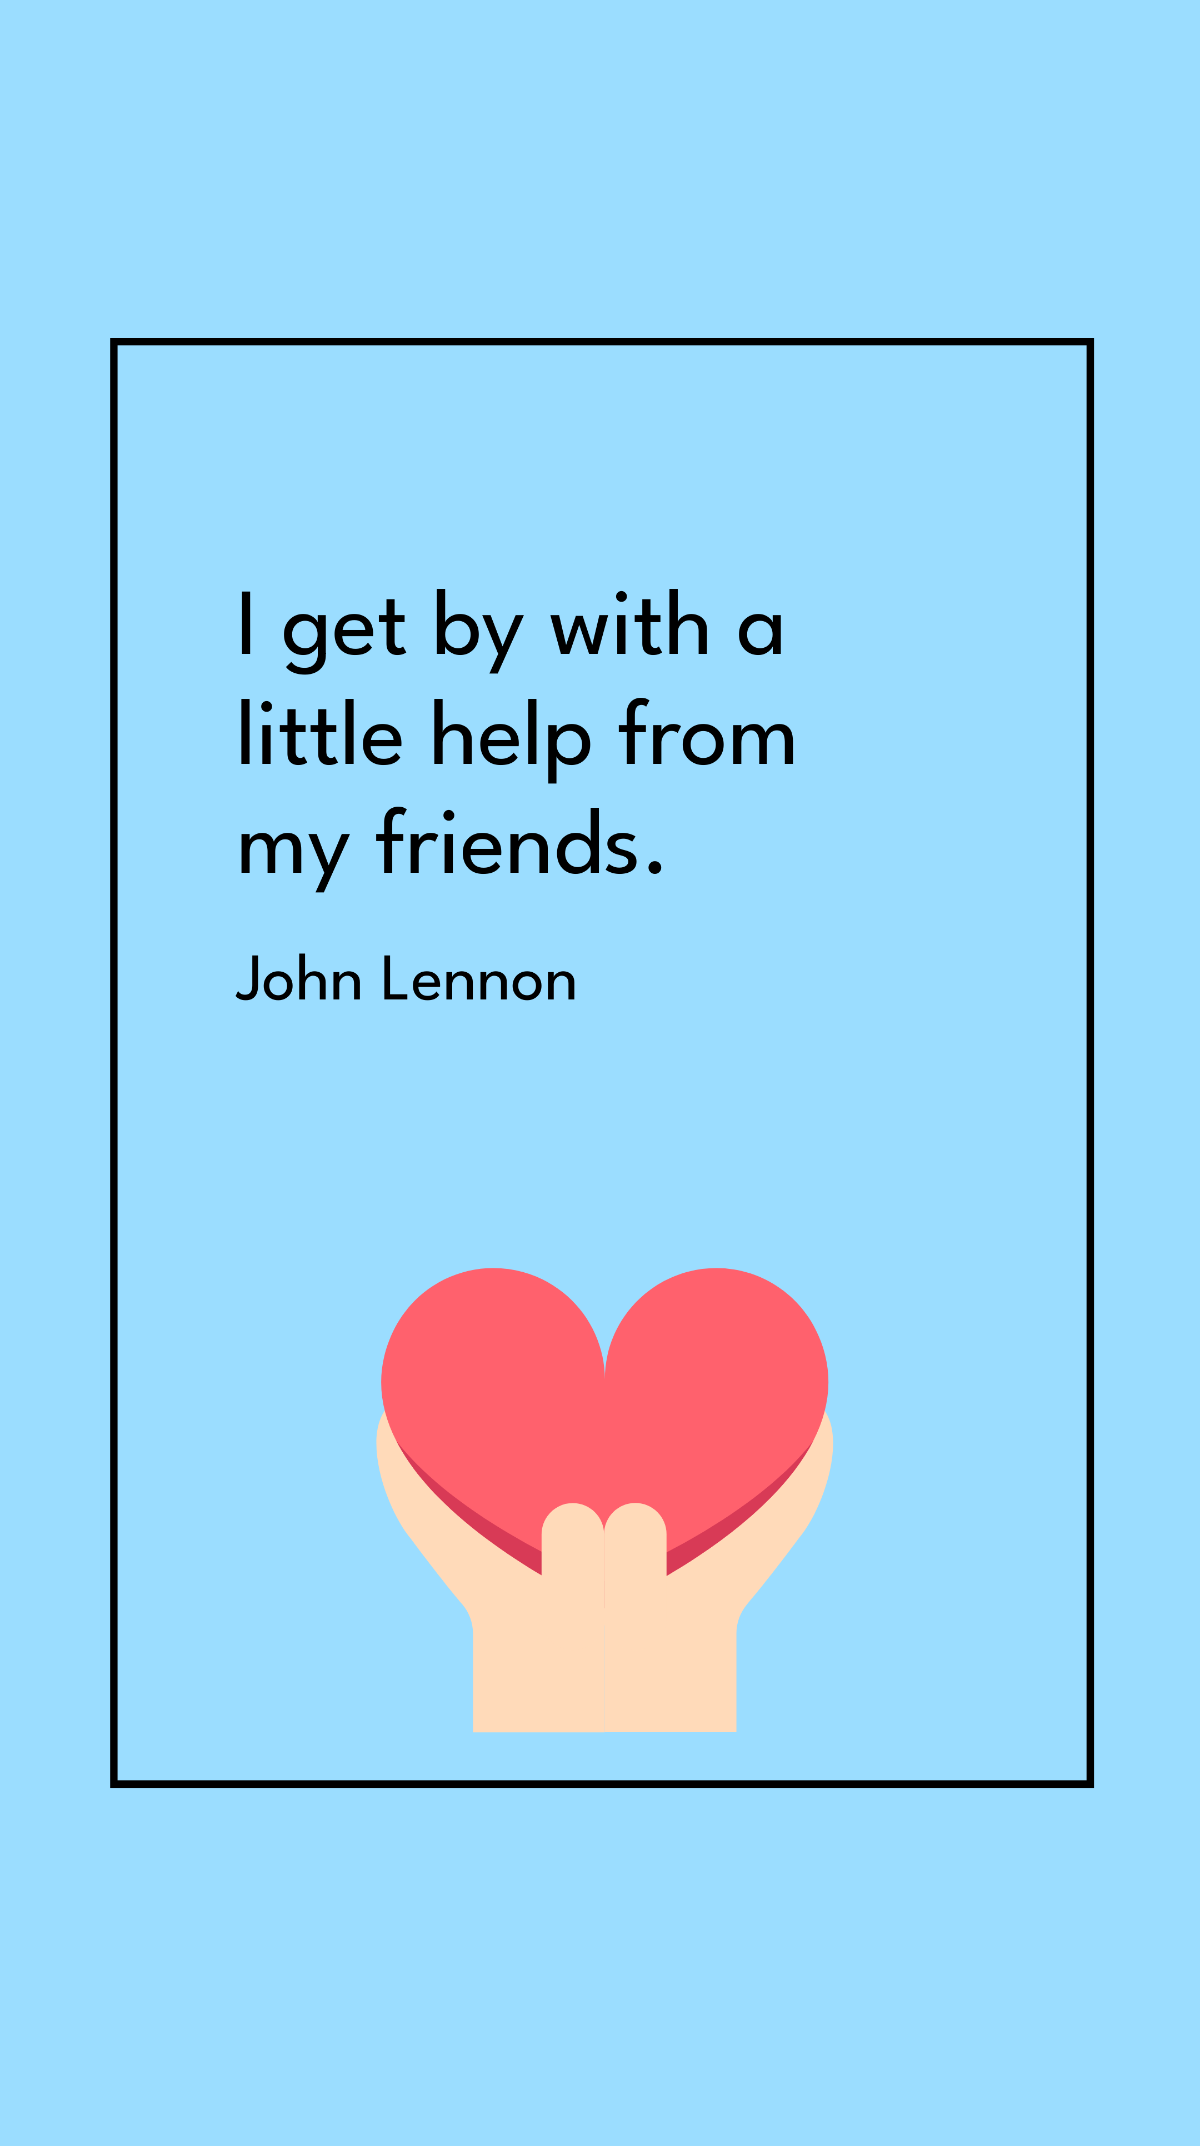 John Lennon - I get by with a little help from my friends. Template